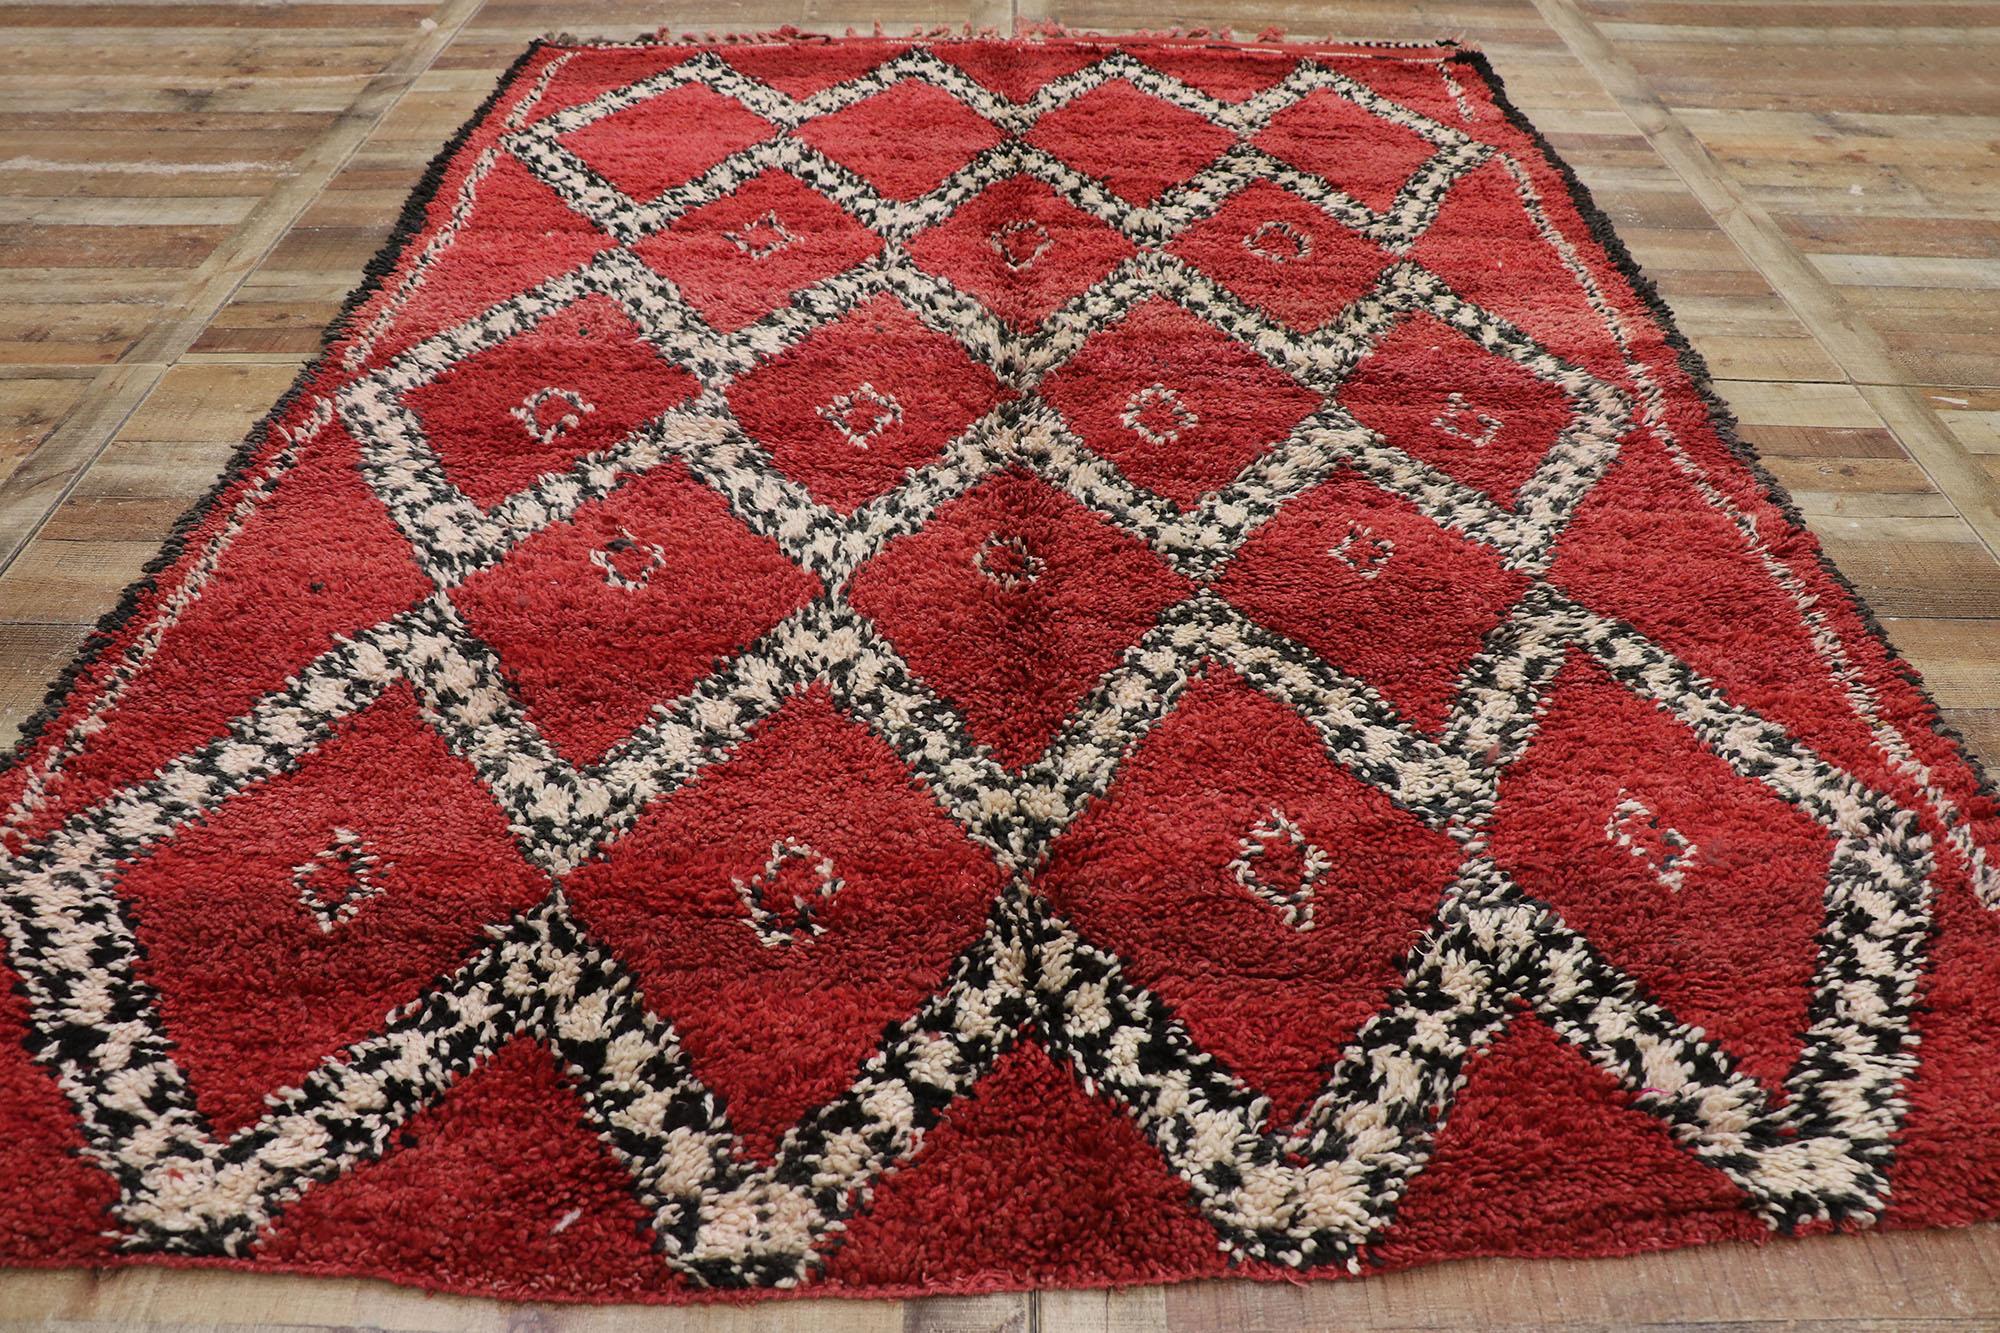 Wool Vintage Moroccan Beni Ourain Rug, Midcentury Meets Boho Chic For Sale